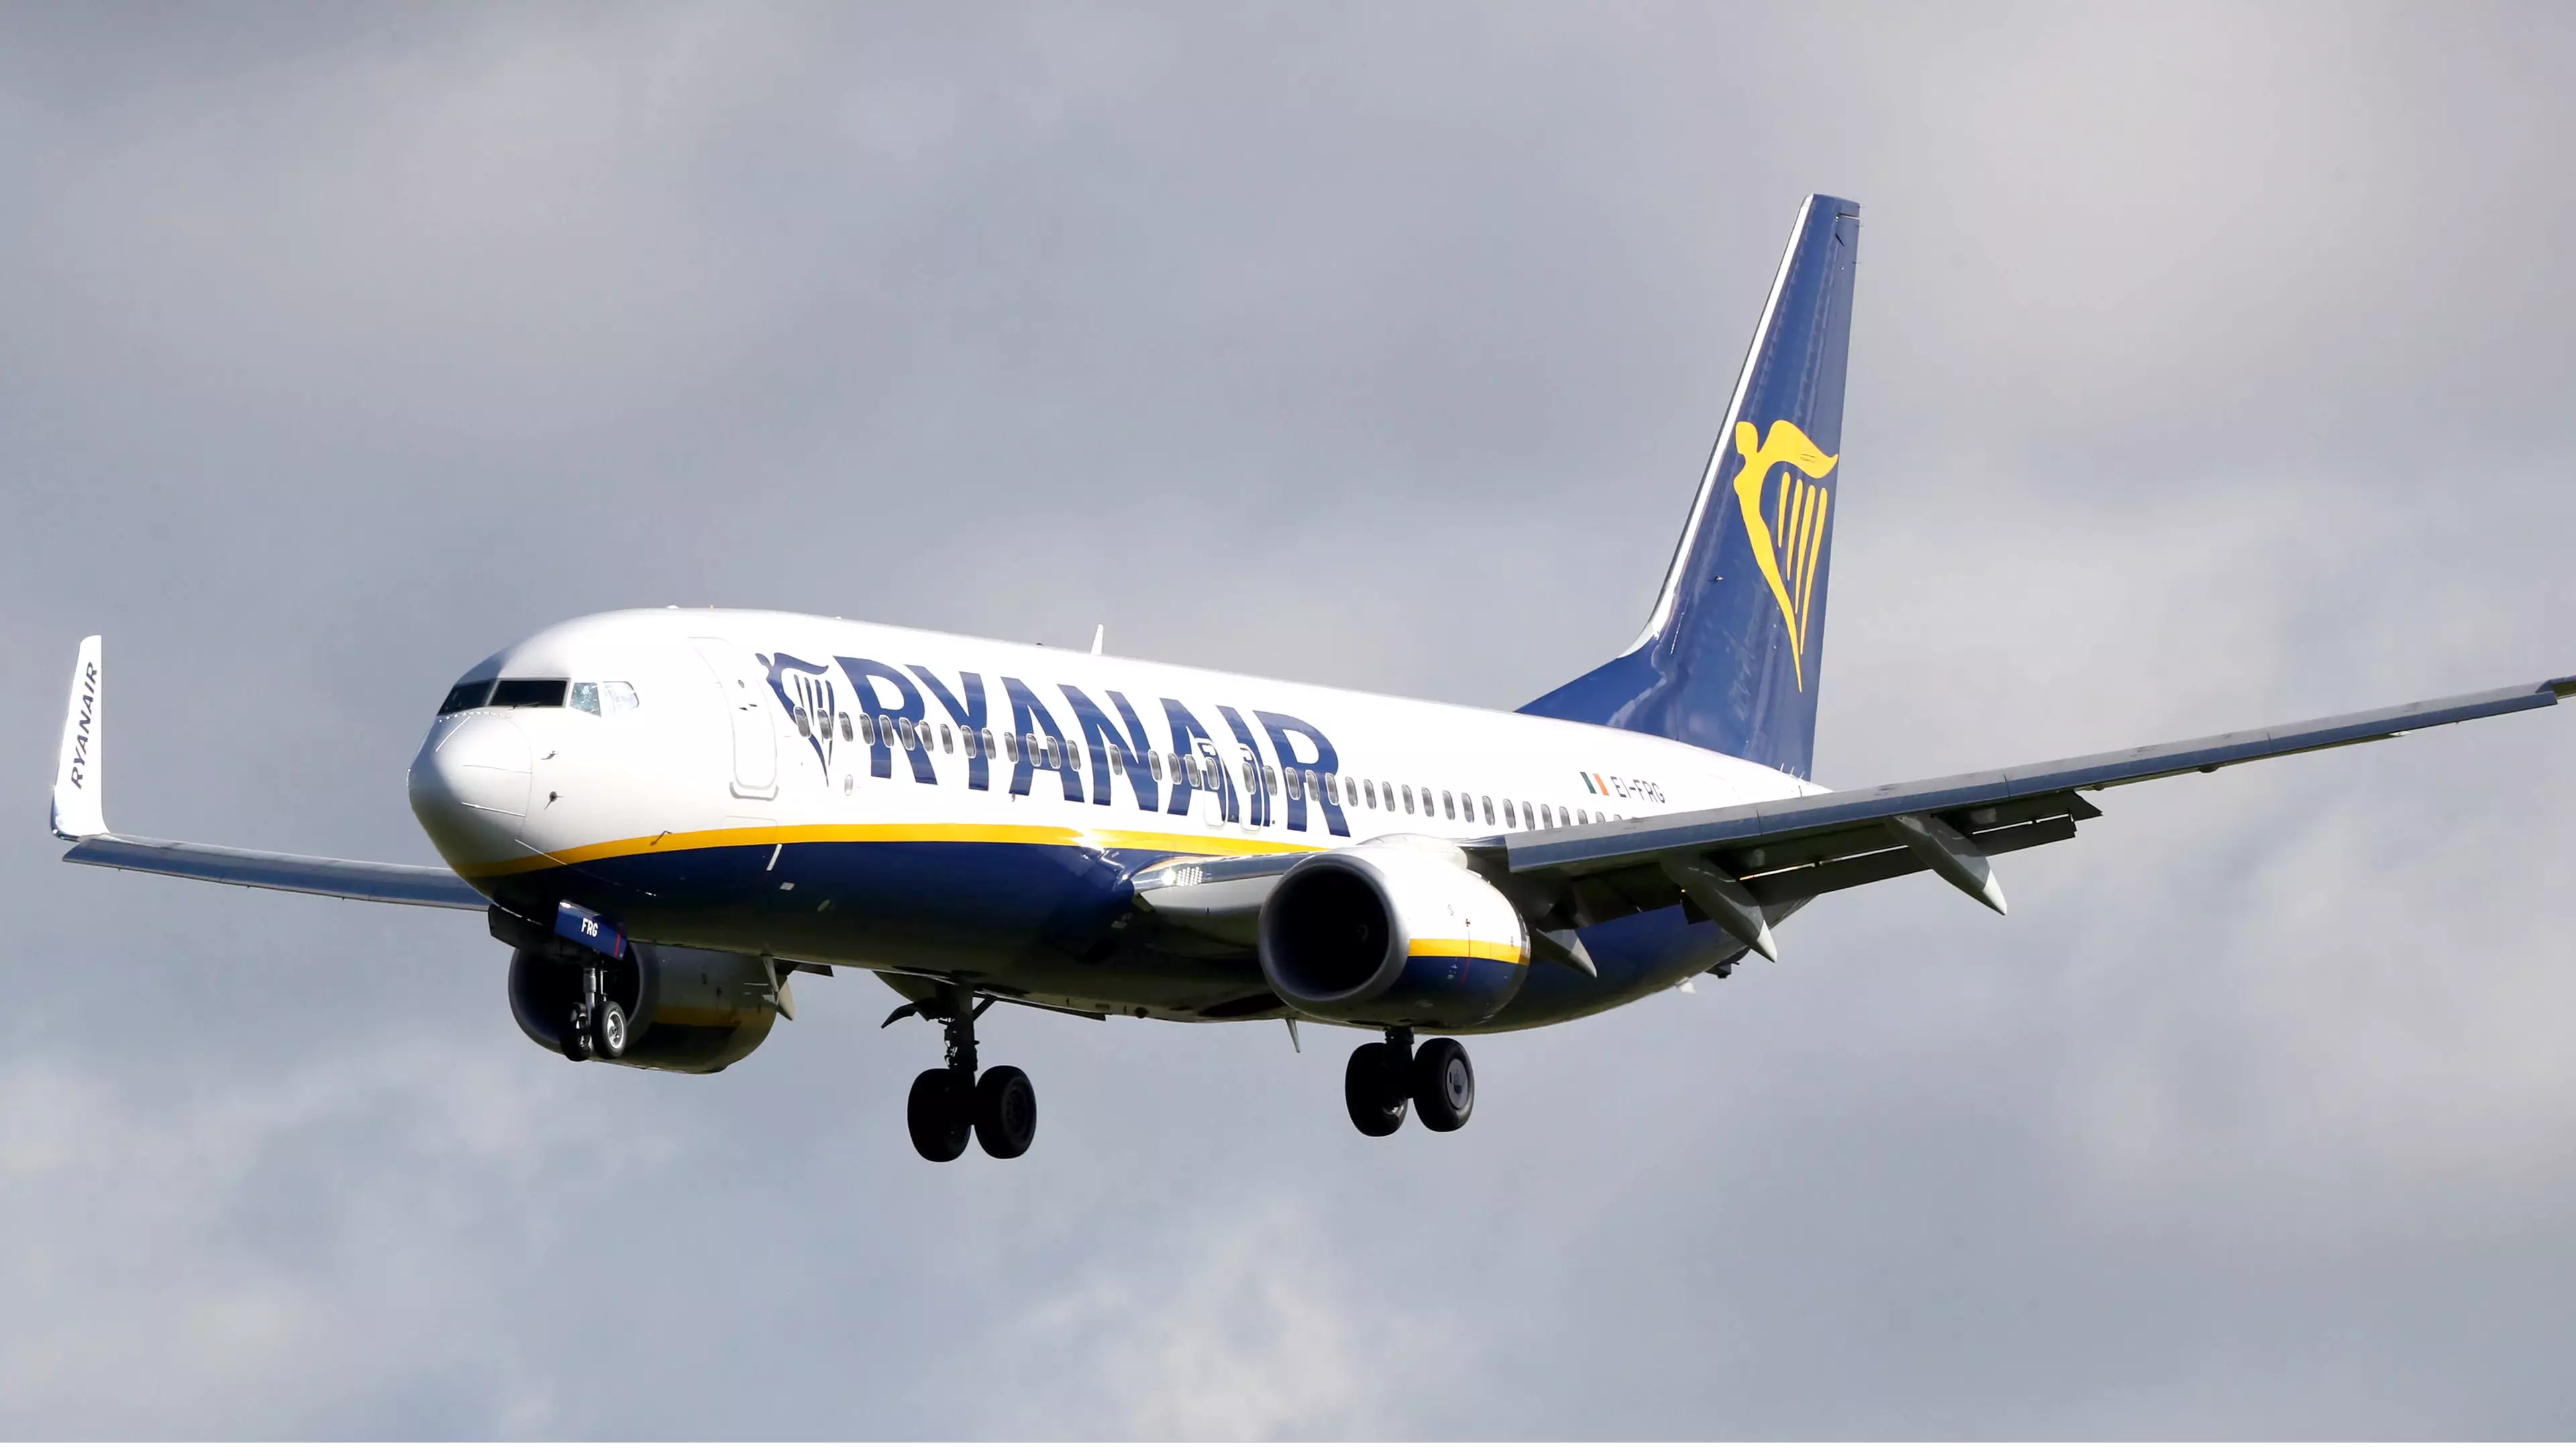 Ryanair To Slash Prices Over Next Six To 12 Months To Get People Flying Again